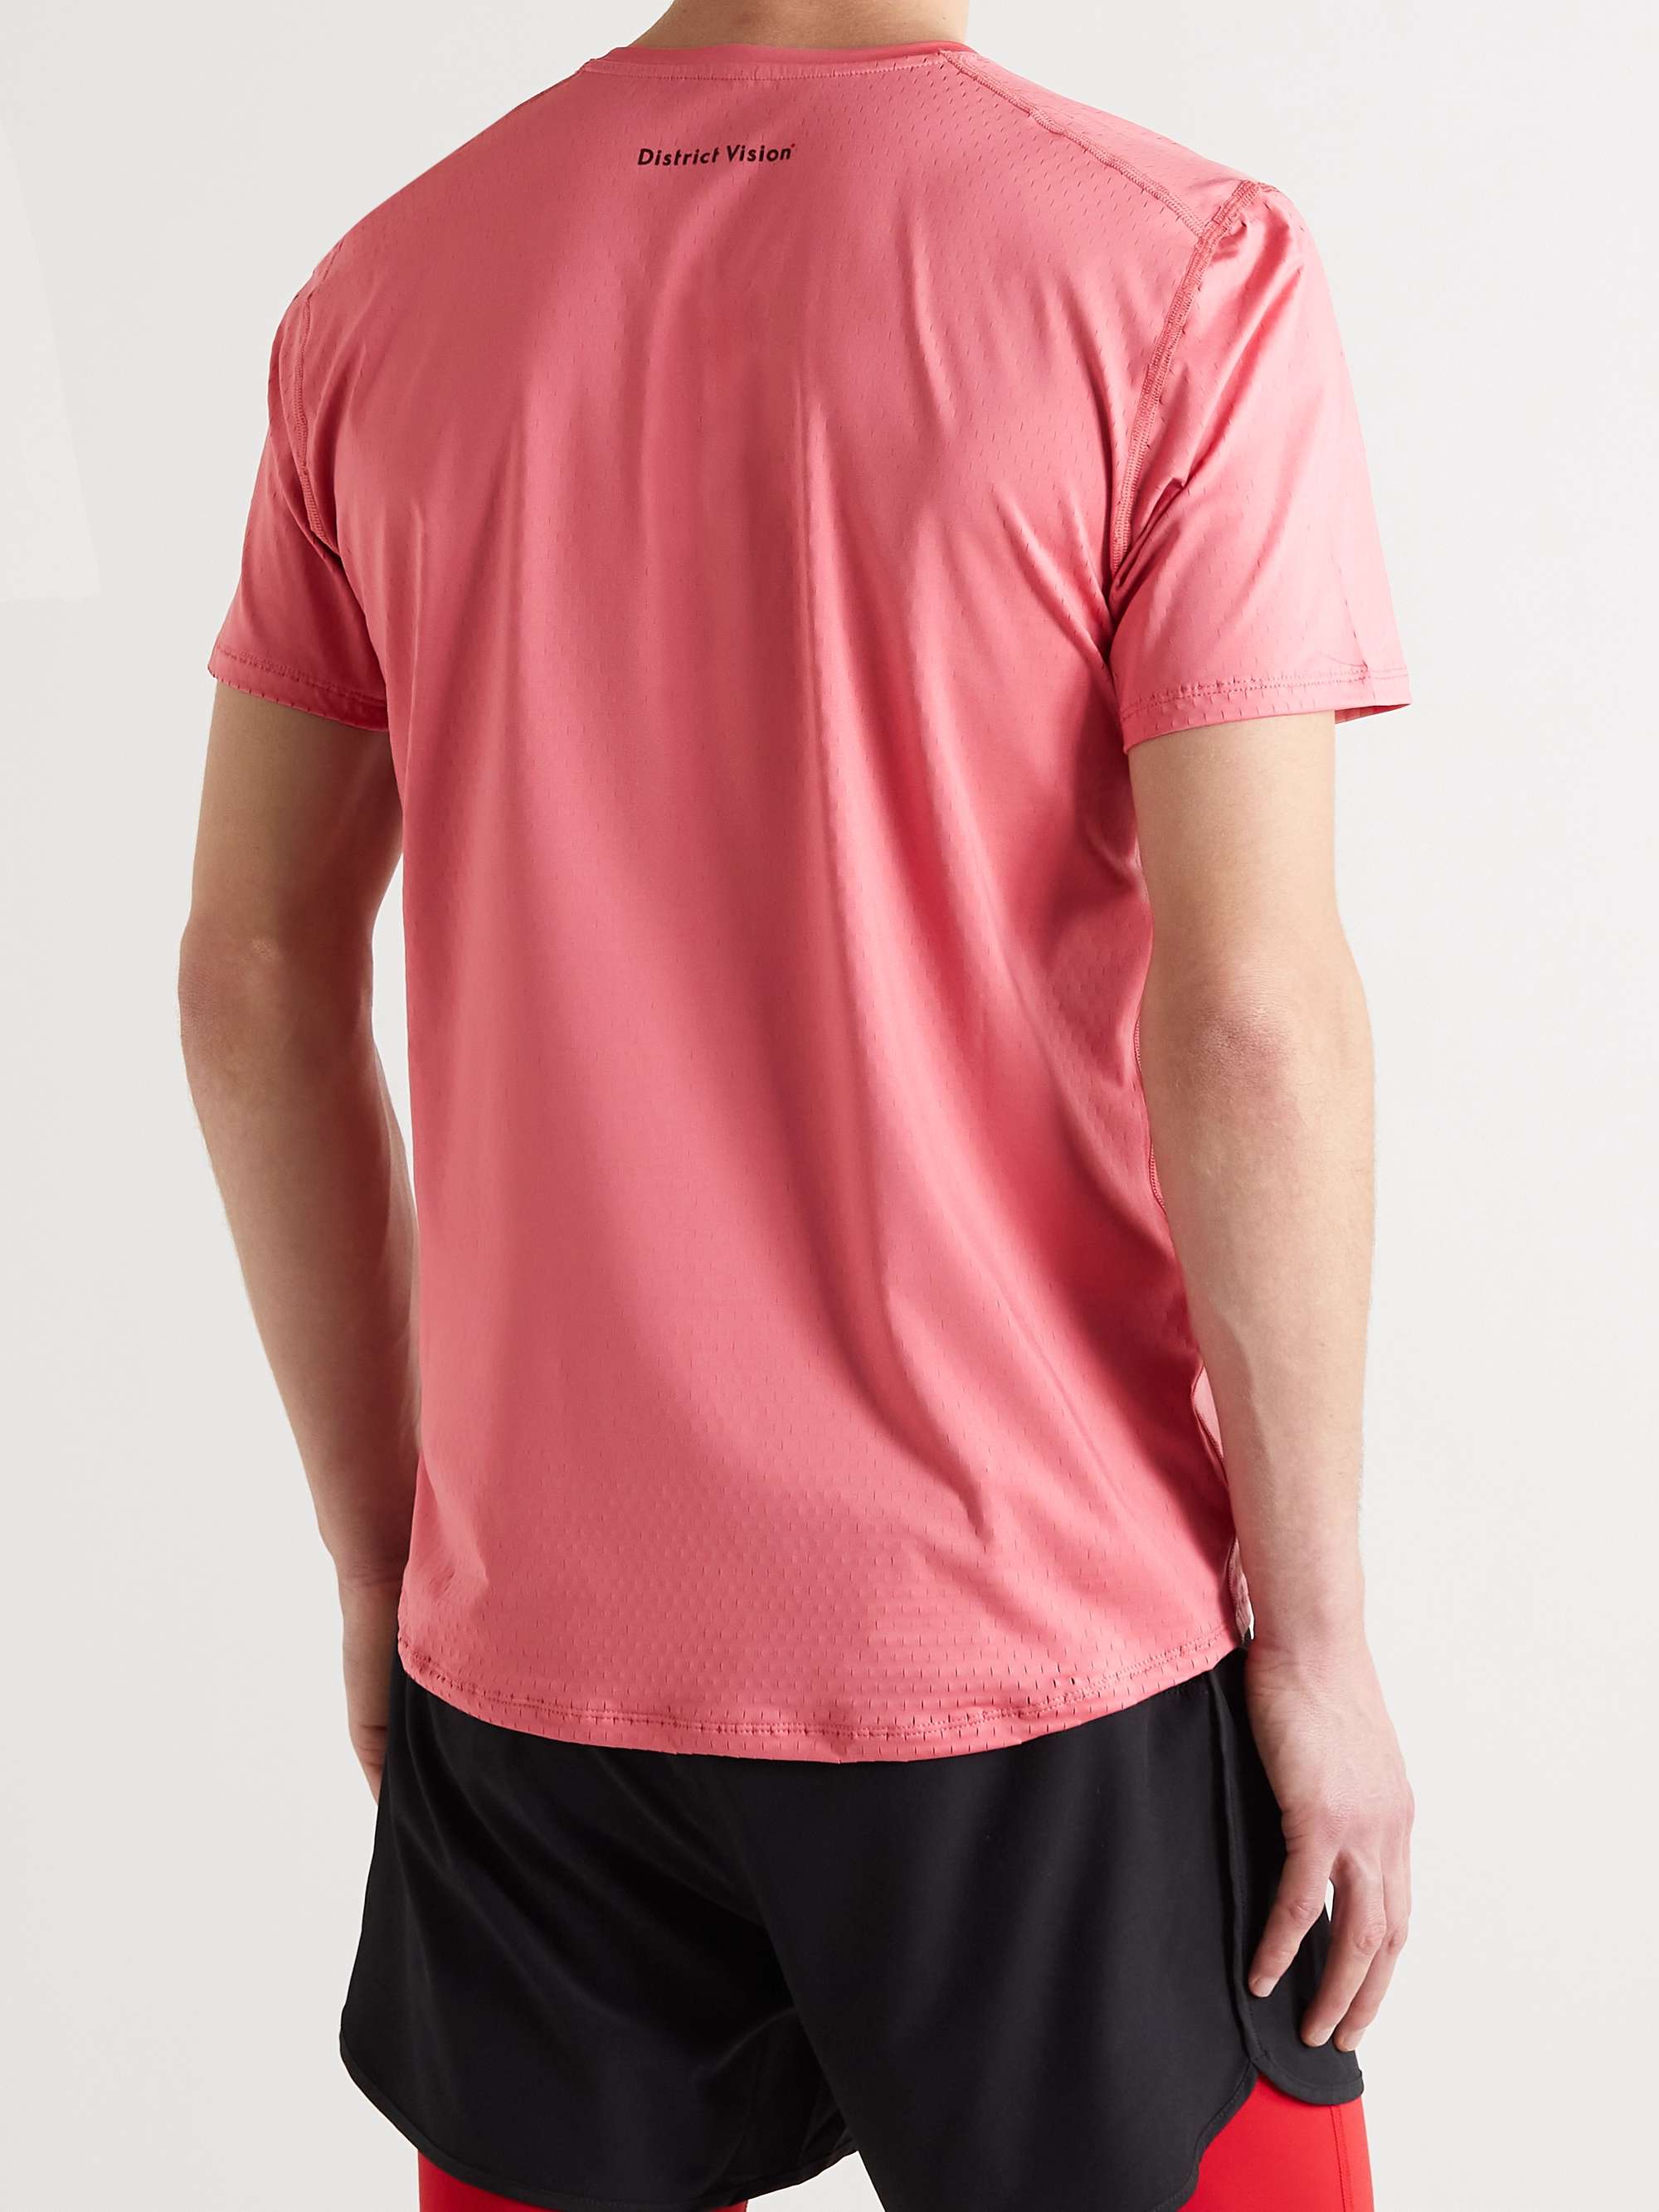 DISTRICT VISION Air-Wear Stretch-Jersey T-Shirt